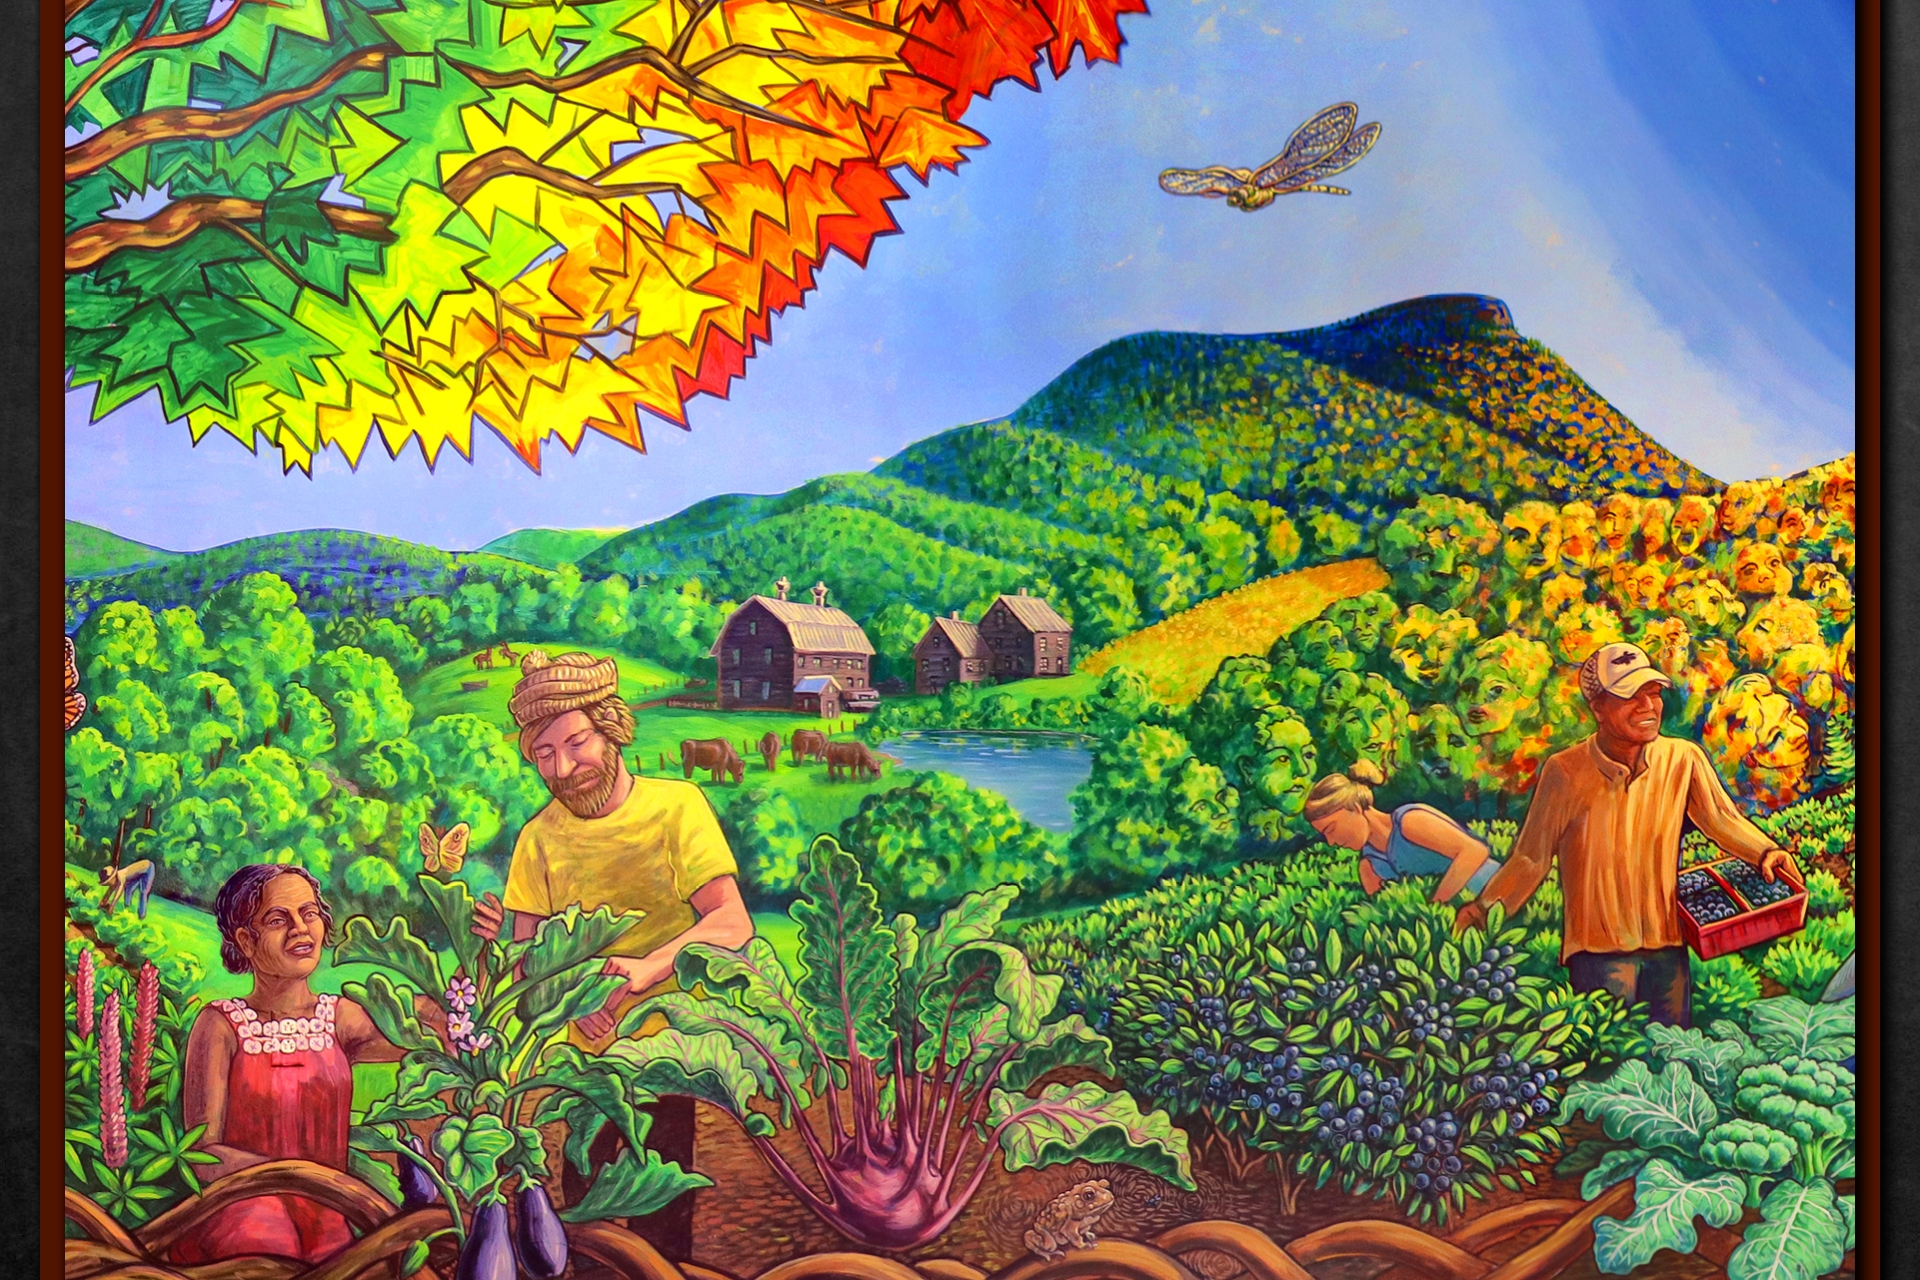 A colorful painting of hilly agricultural land where the scene transitions from summer on the left to fall on the right. In the foreground, several farmers are harvesting crops. Behind them are three farm buildings, cows grazing, and many trees leading from the hills to the top of a tall mountain peak. At the top of the image are tree branches with brightly colored leaves extending from the left, a dragonfly on the right, and a medium blue sky that spans fully across.